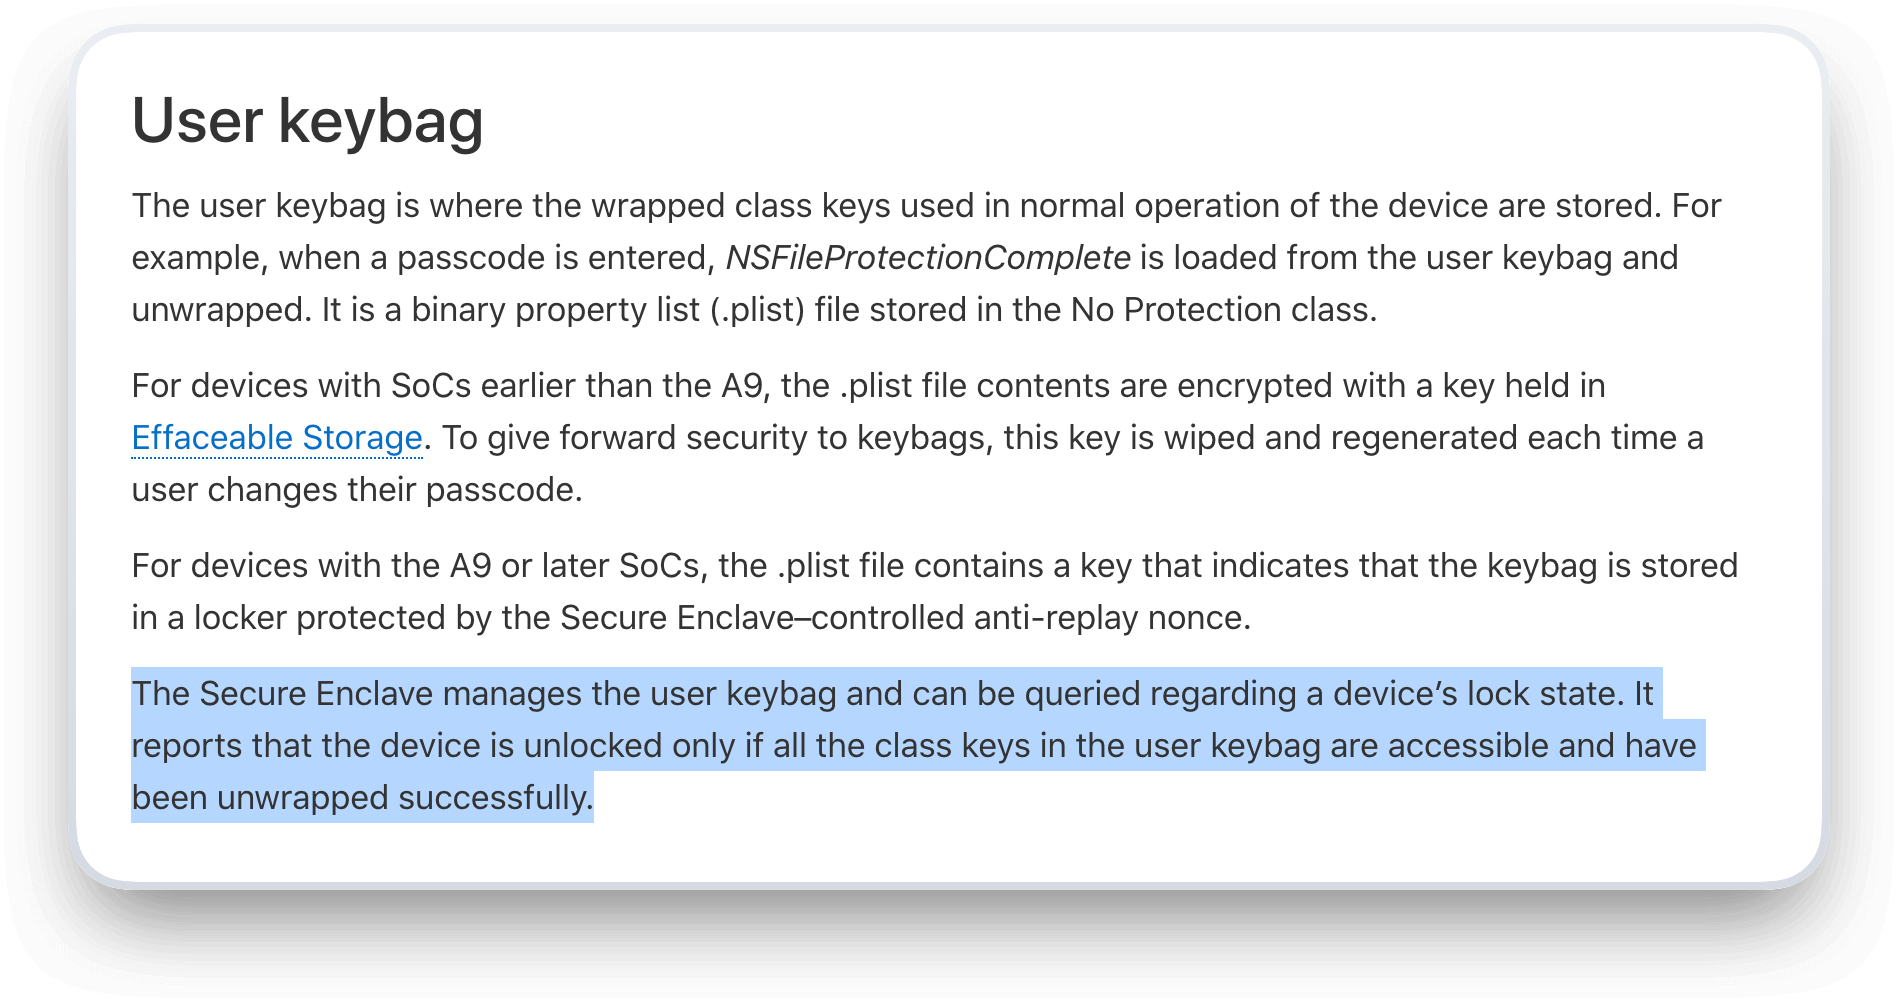 A screenshot of the Apple Developer Documentation describing the User Keybag. The full text can be found at https://support.apple.com/guide/security/keybags-for-data-protection-sec6483d5760/web